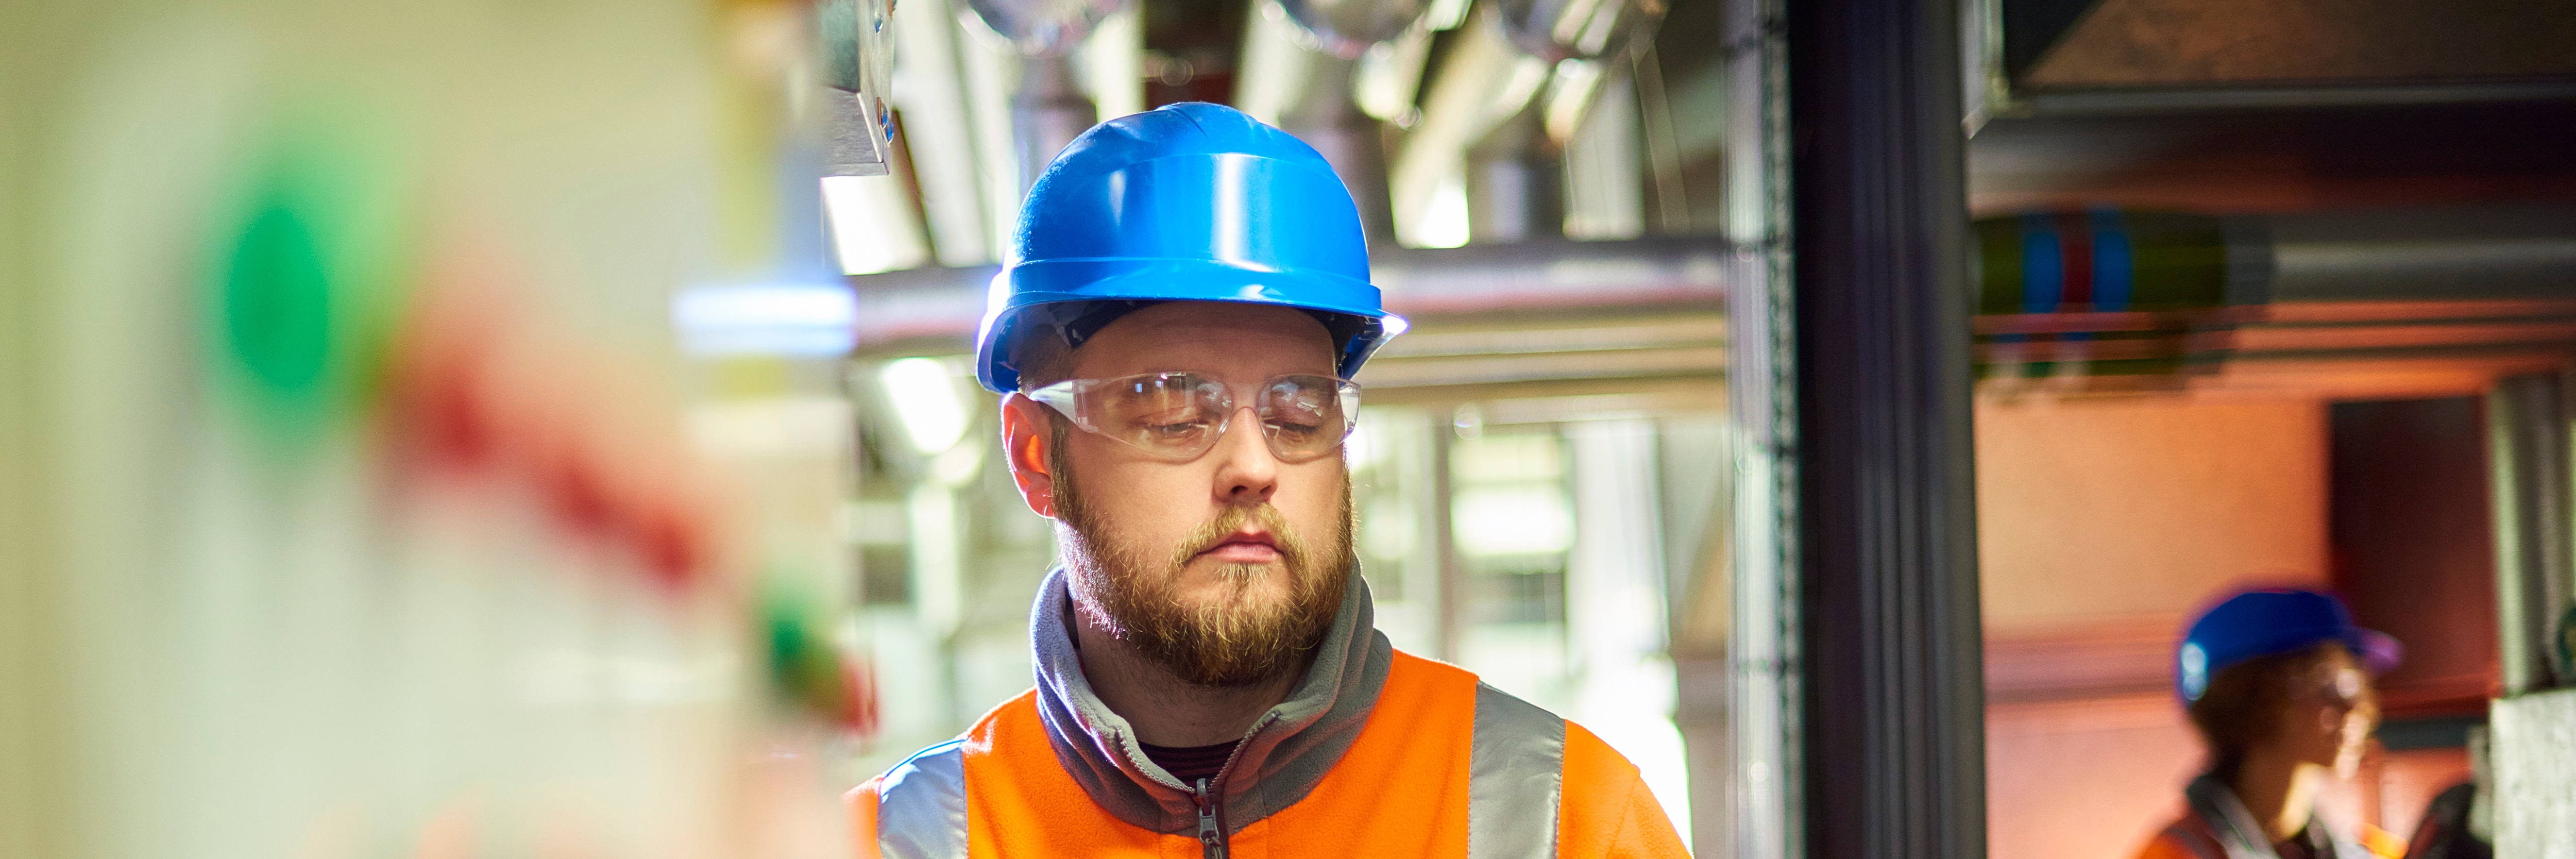 An industrial service engineer conducts a safety check of a control panel in a boiler room. He is wearing hi vis, hard hat, safety glasses and holding a digital tablet as he conducts a safety inspection.